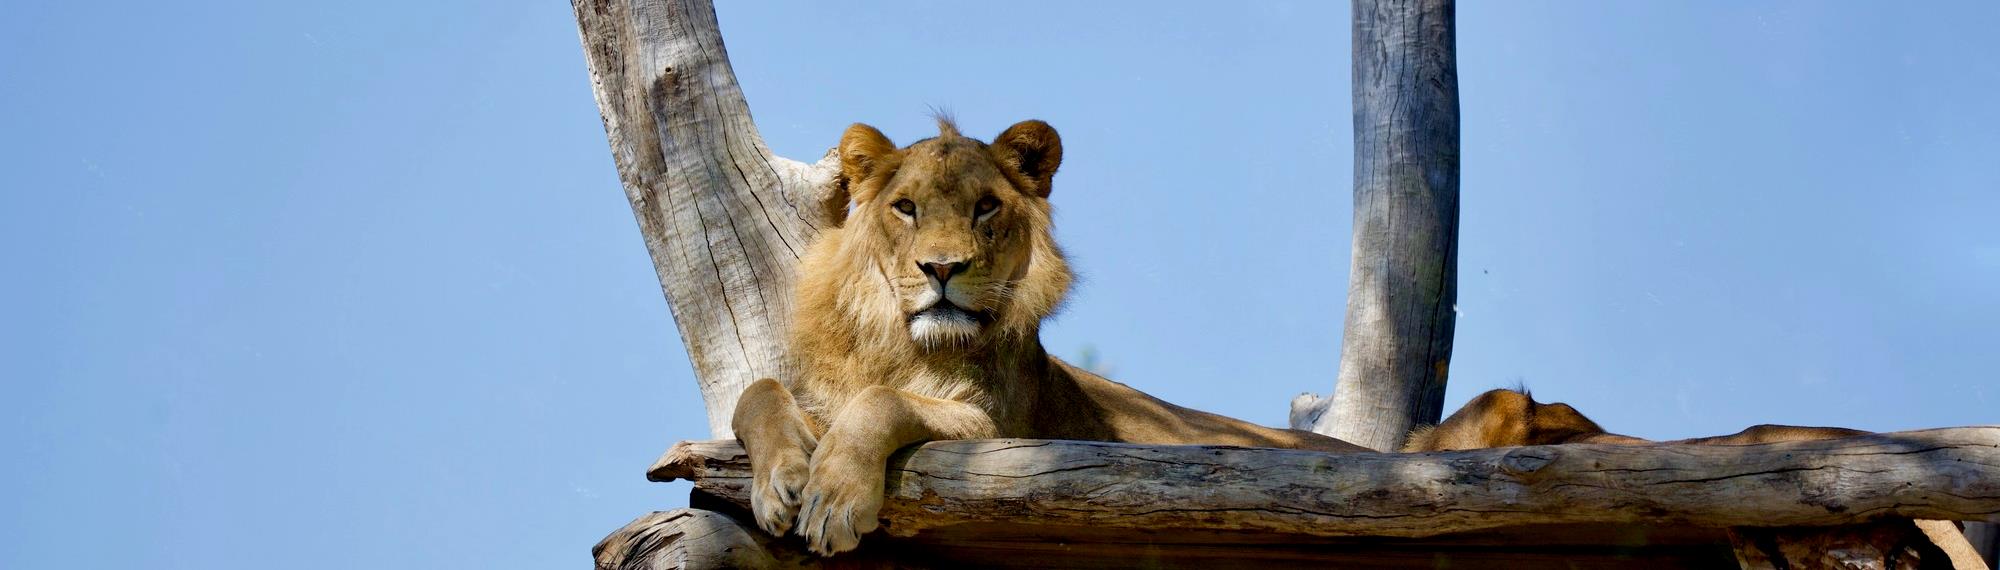 African Lion looking down while resting a wooden platform.